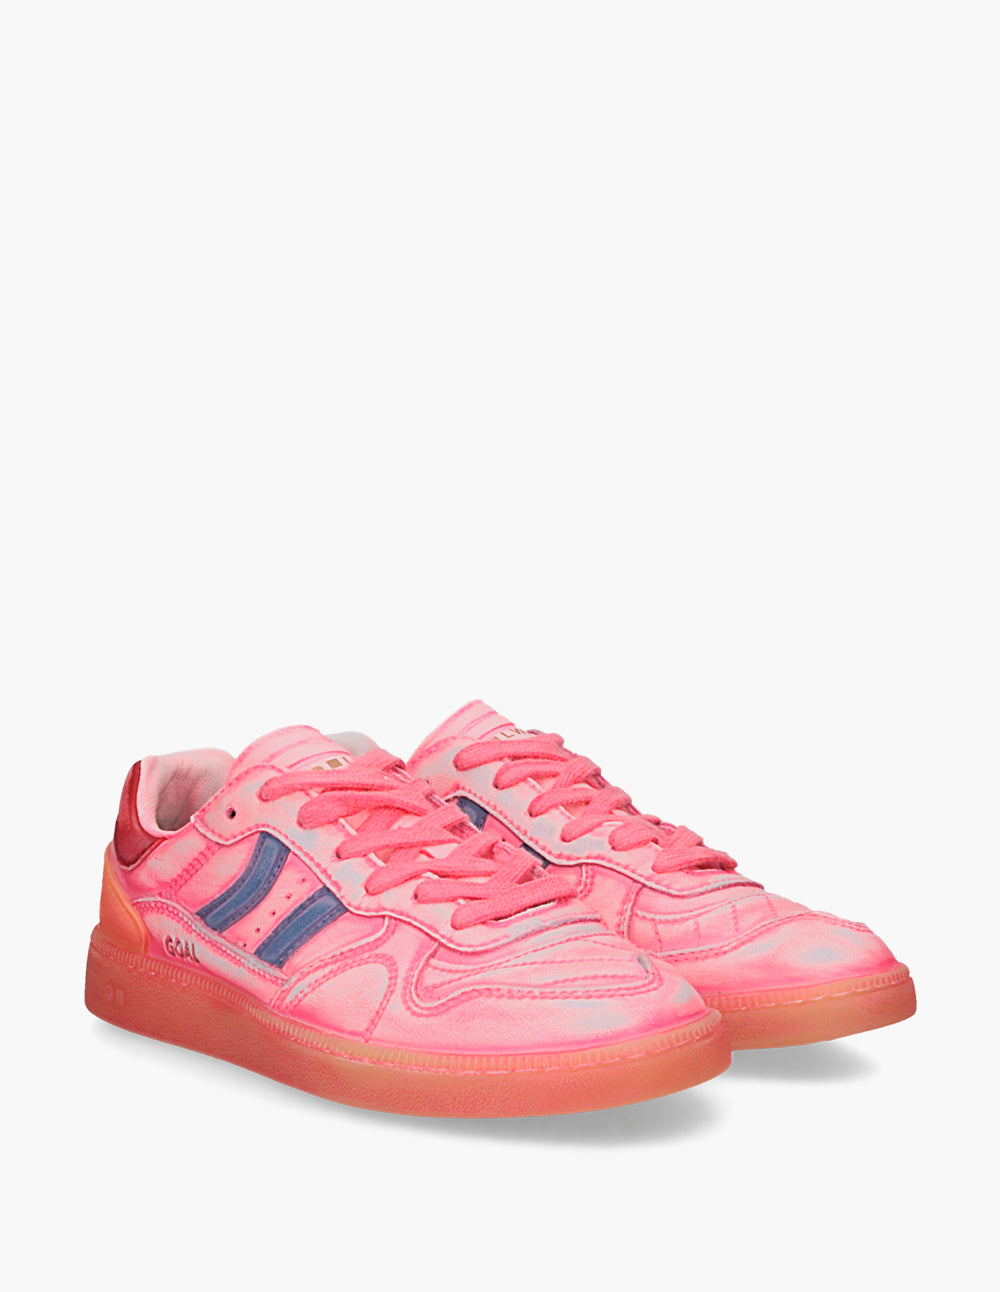 GOAL CRAFT PINK LEATHER WOMEN